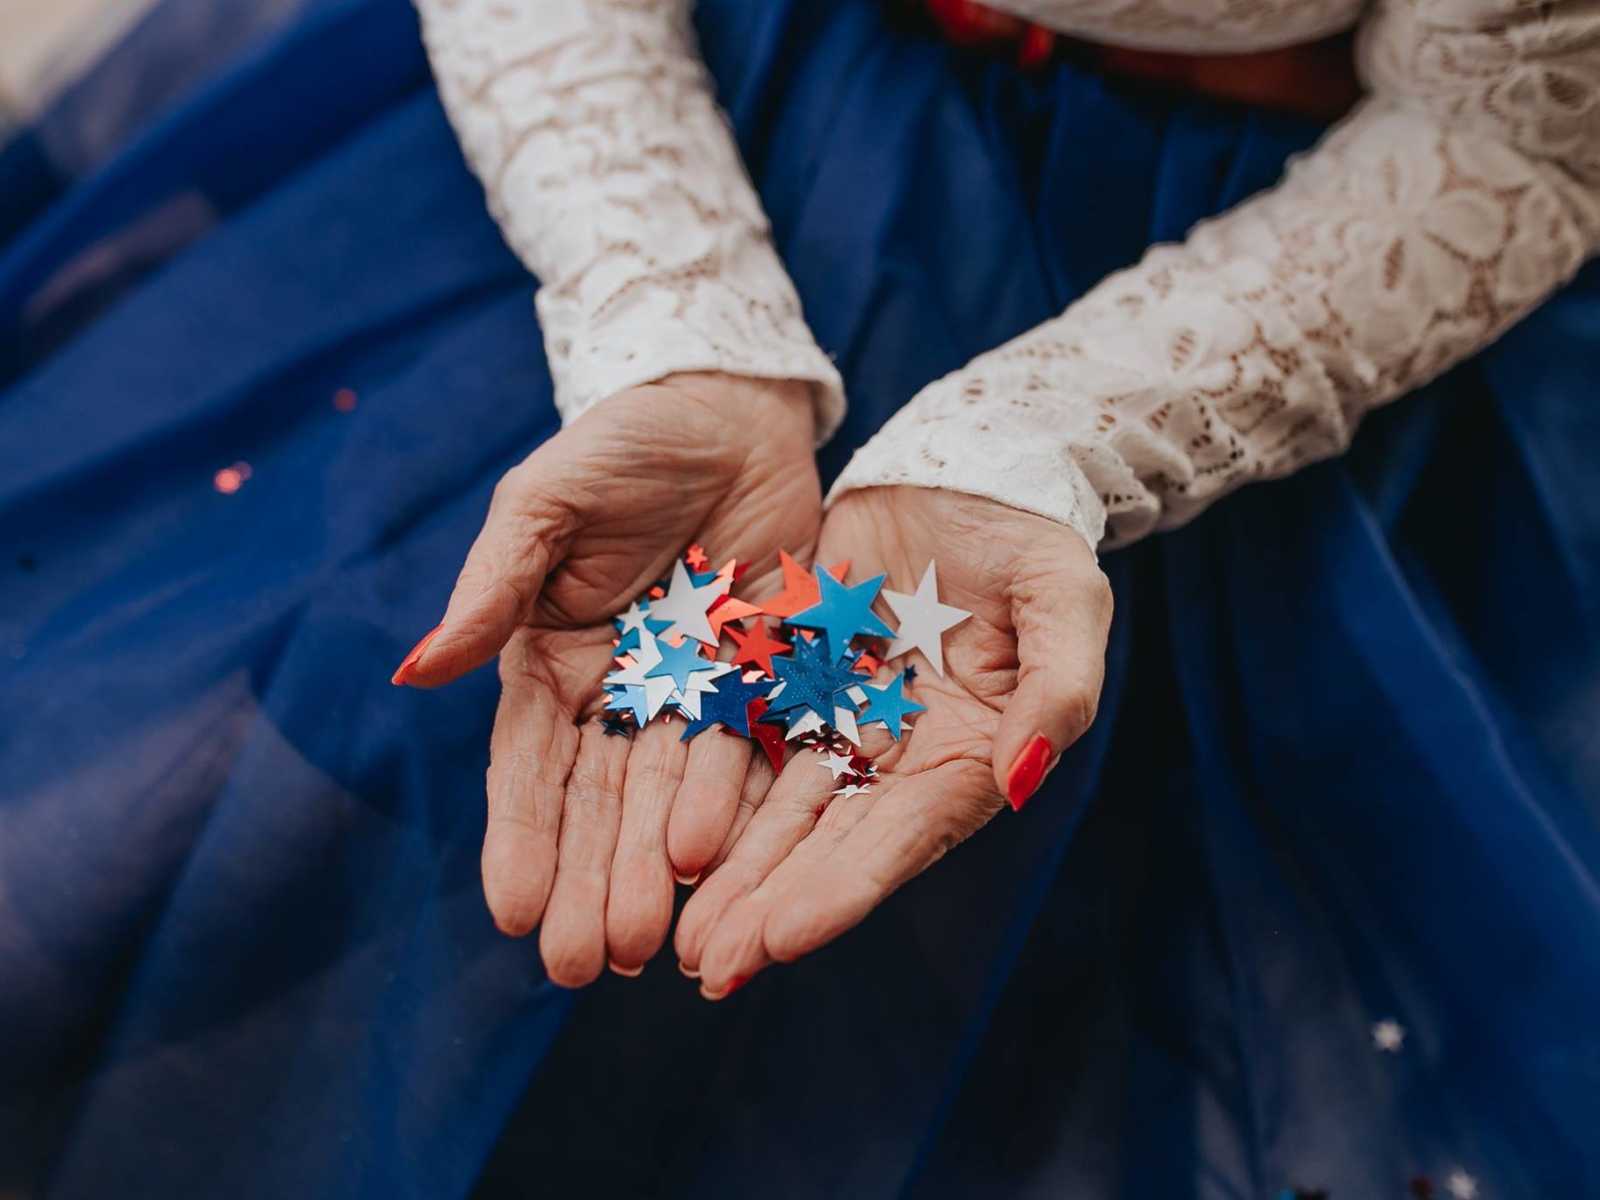 close up of elderly woman's hands holding small red white and blue stars